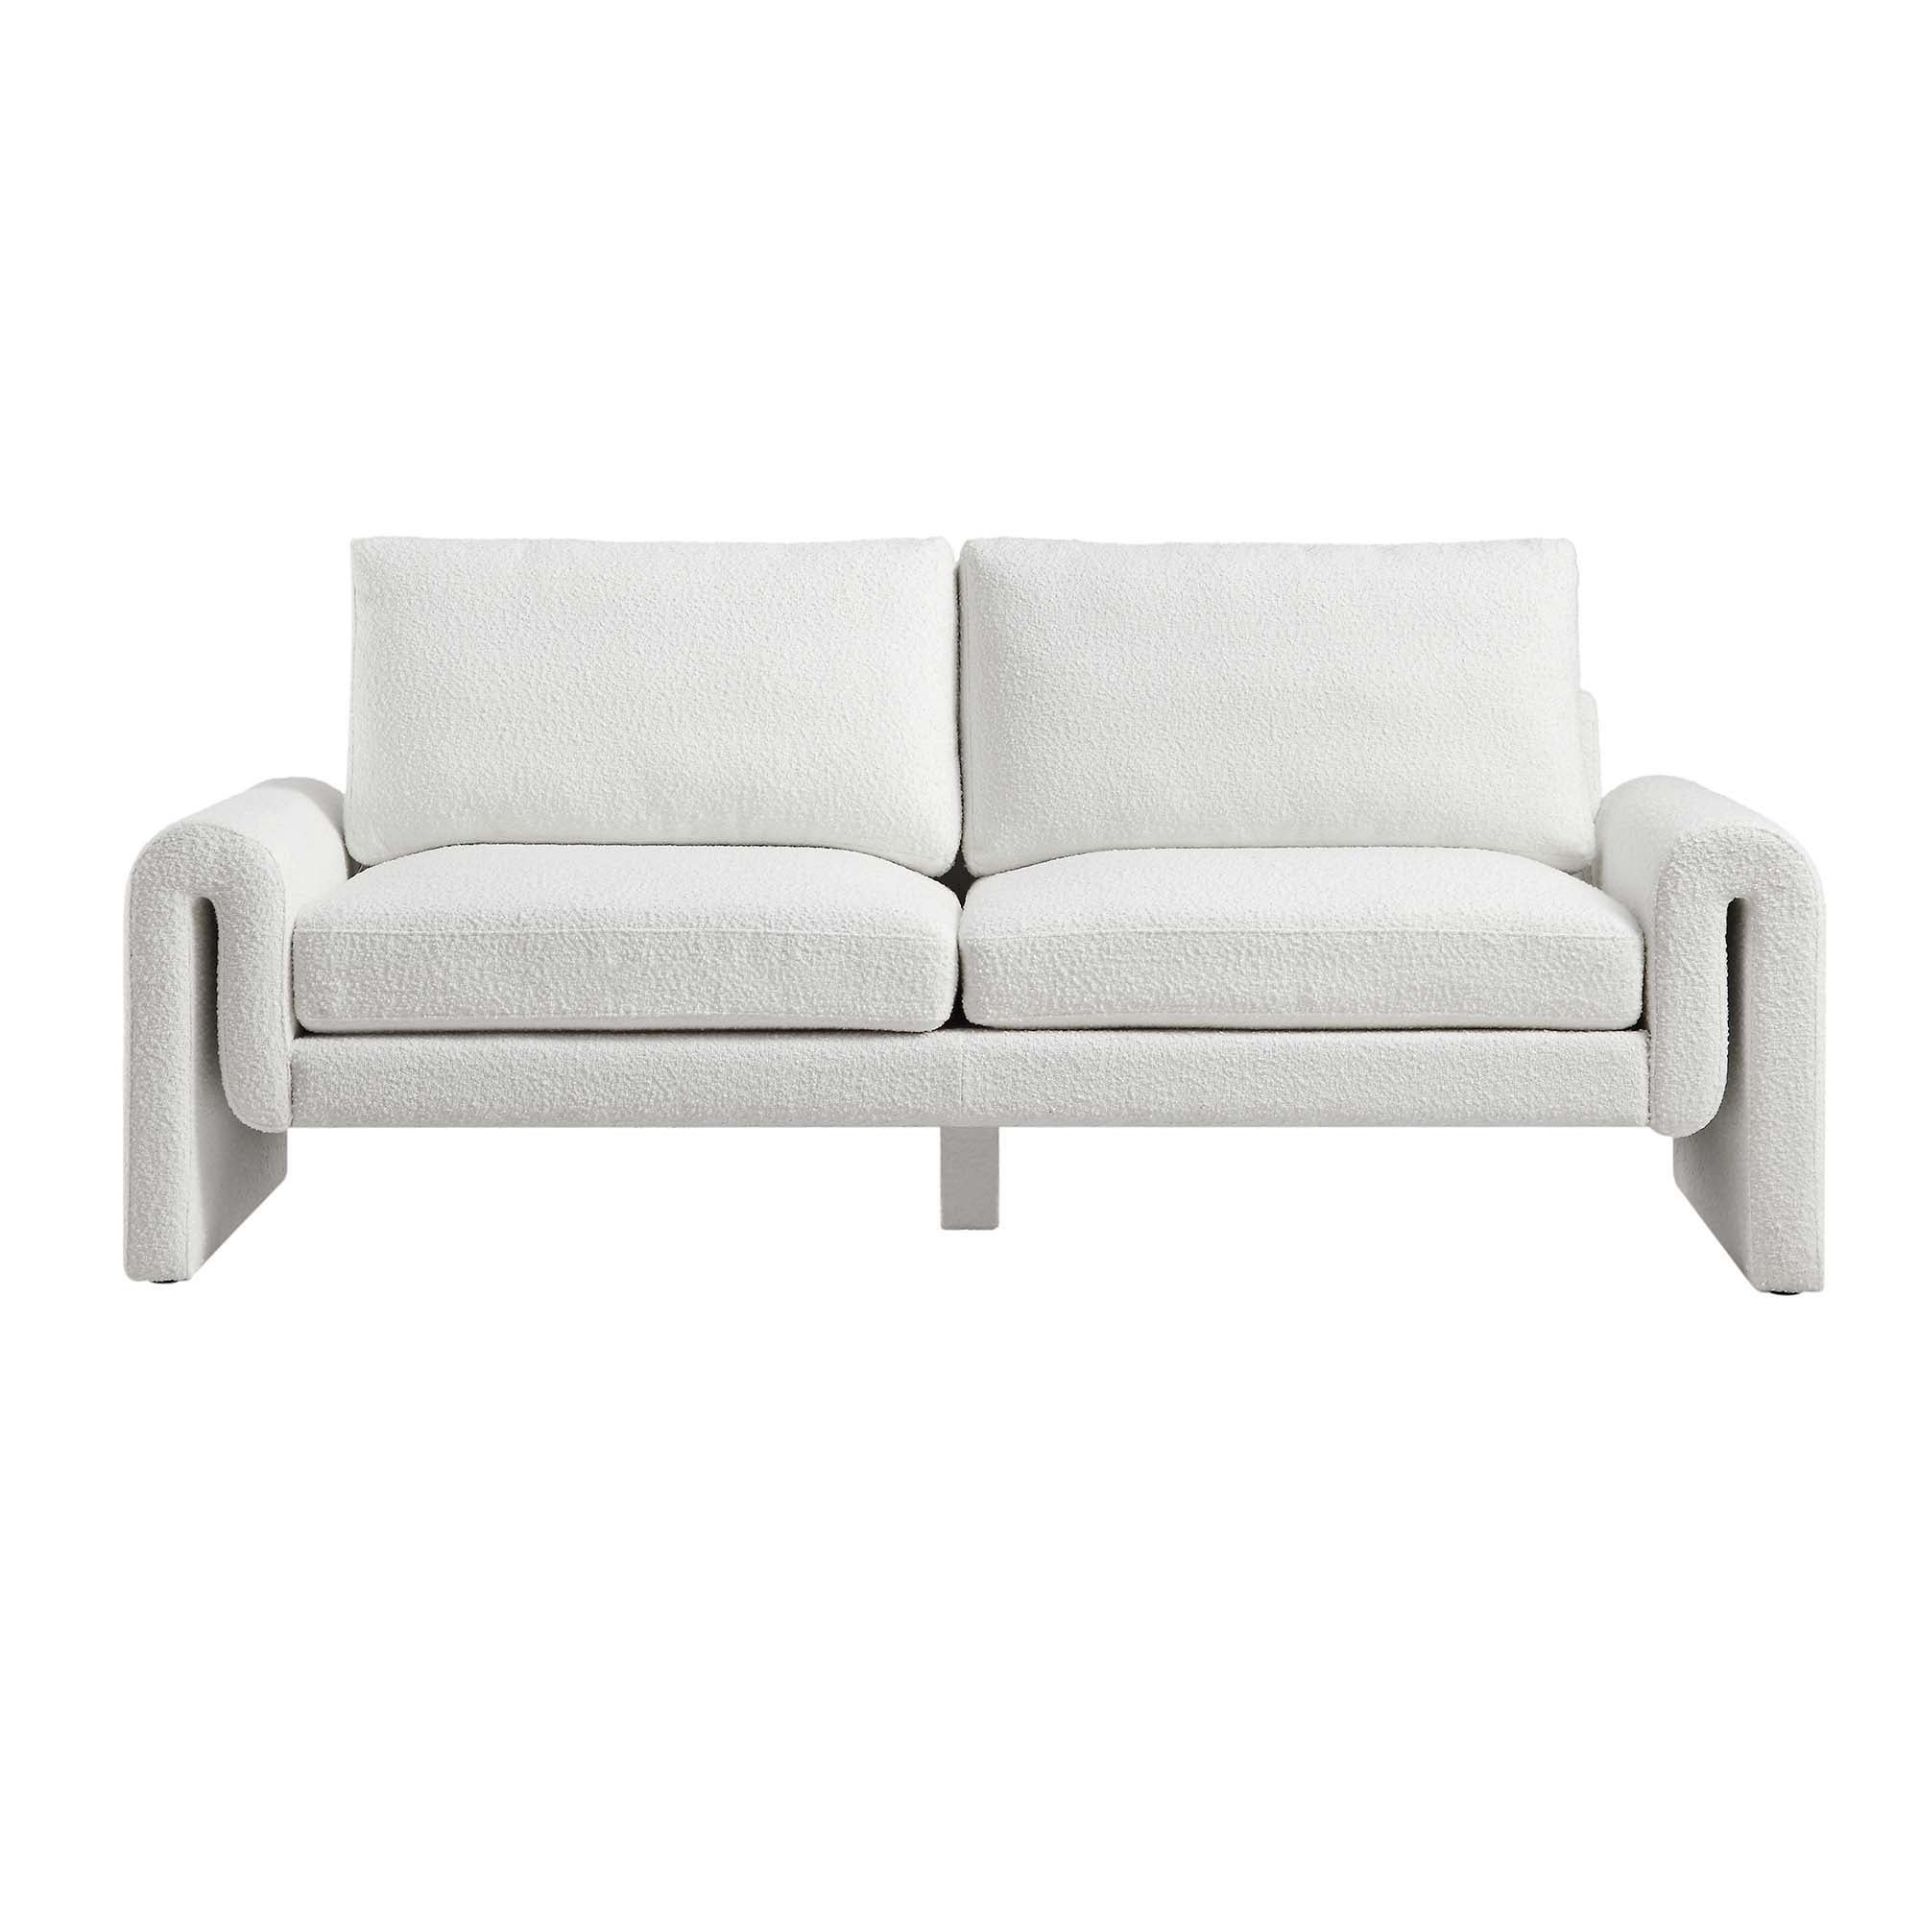 Hampstead White Boucle Curved 3-Seater Sofa. -ER23. RRP £679.99. Reinvigorating modernist style - Image 2 of 2